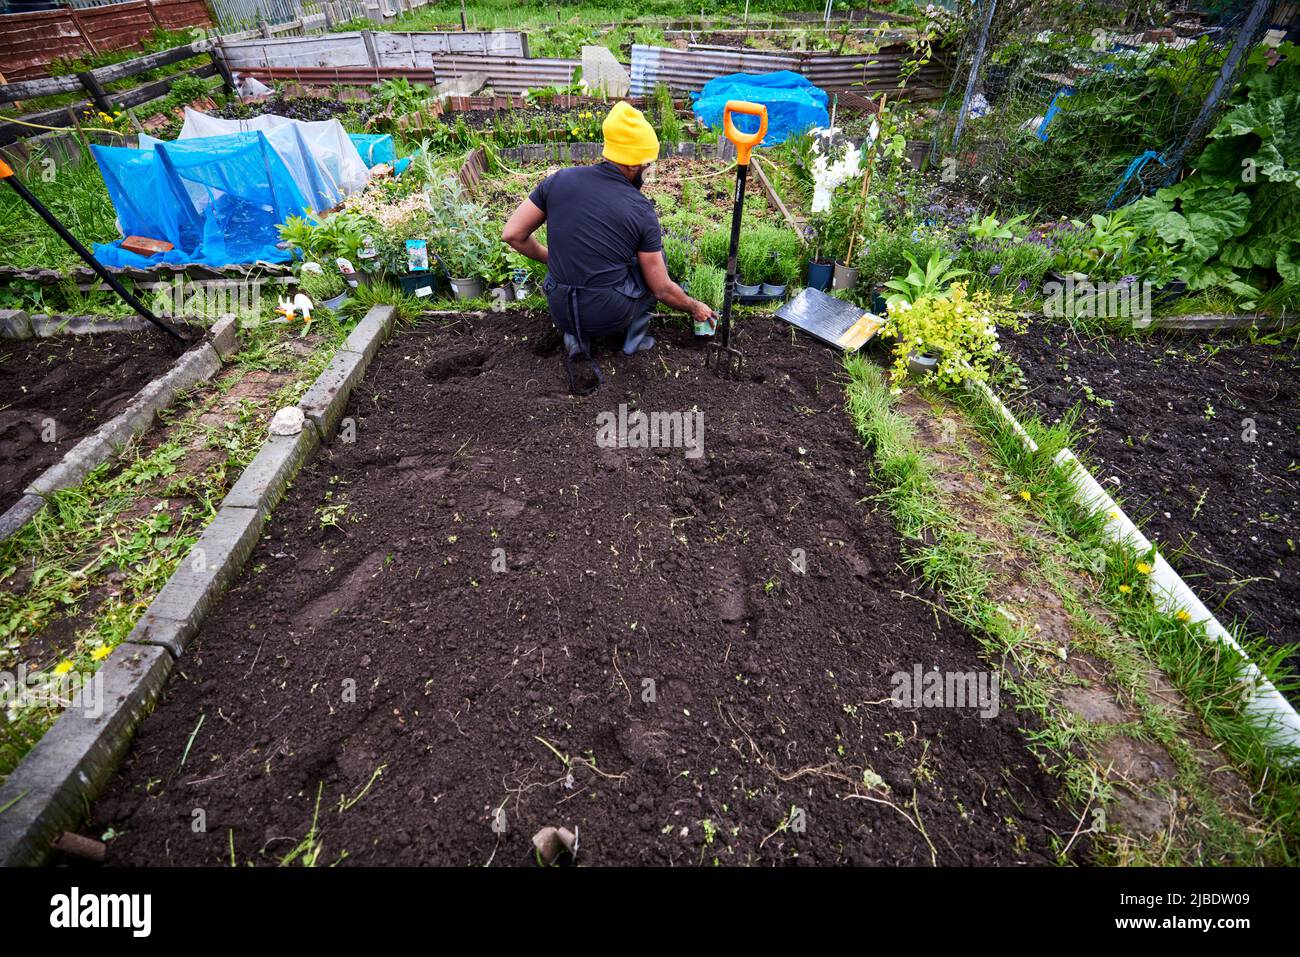 Abbey Hey Allotments, in Gorton, Manchester to make bee friendly gardens for World Bee Day Stock Photo